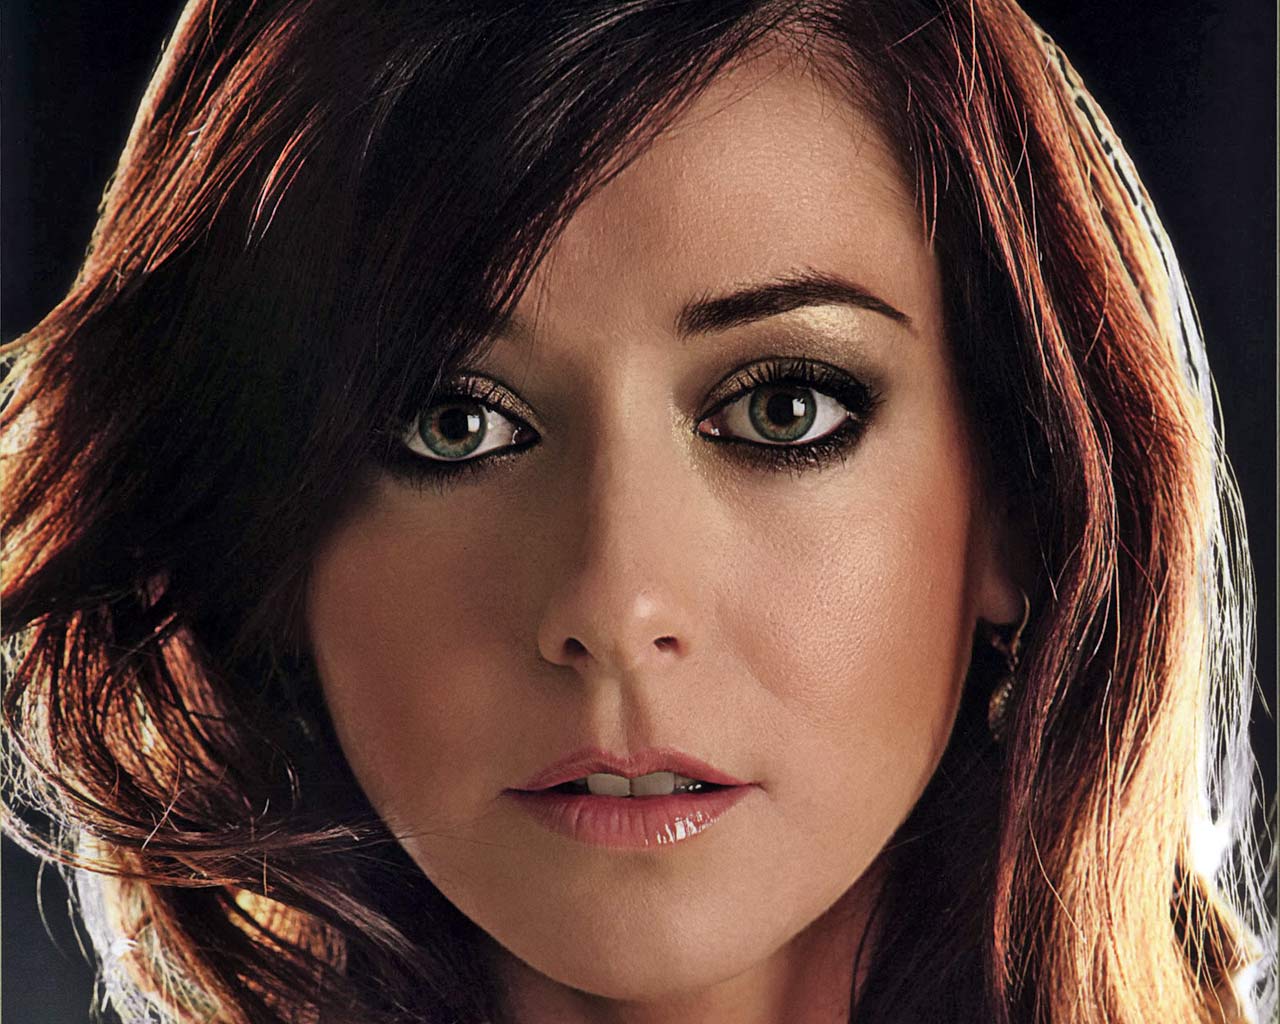 Image Of Posted Tontenk Labels Alyson Hannigan Hollywood